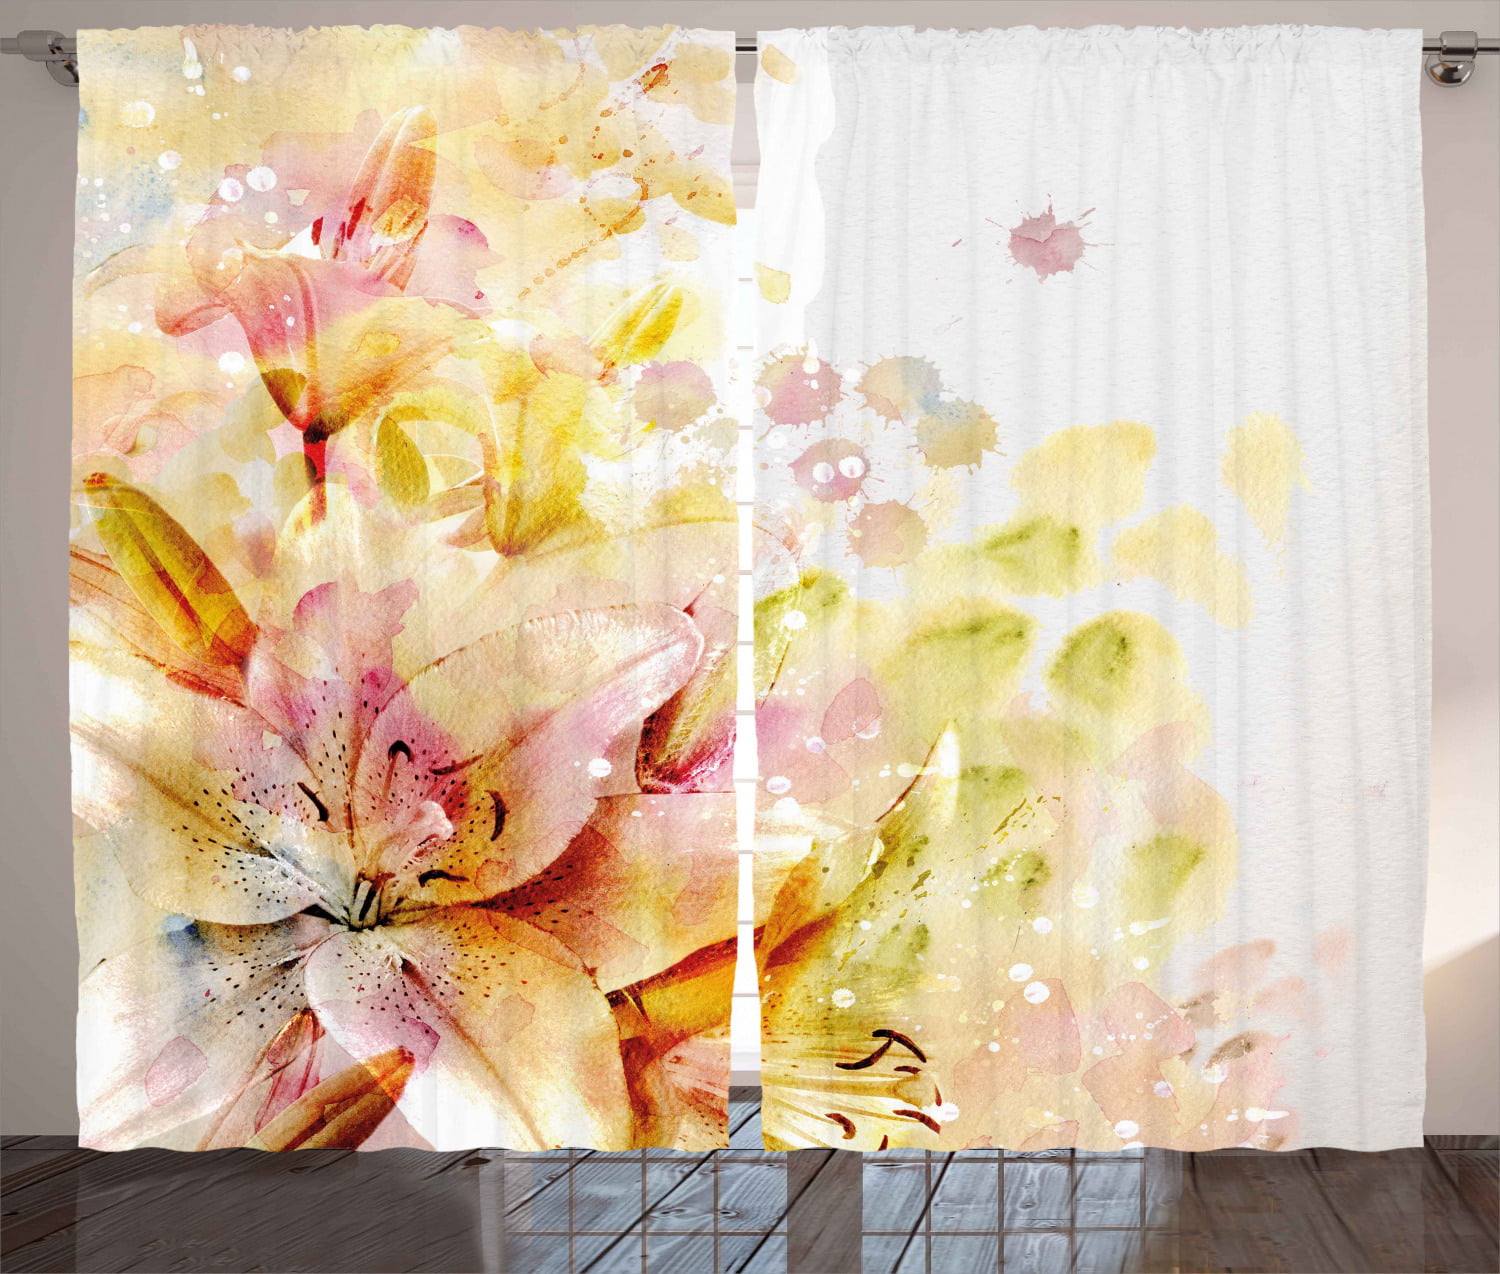 Scenery Curtain Wellmira Printed with Flowers in Pots Image for Living Room 